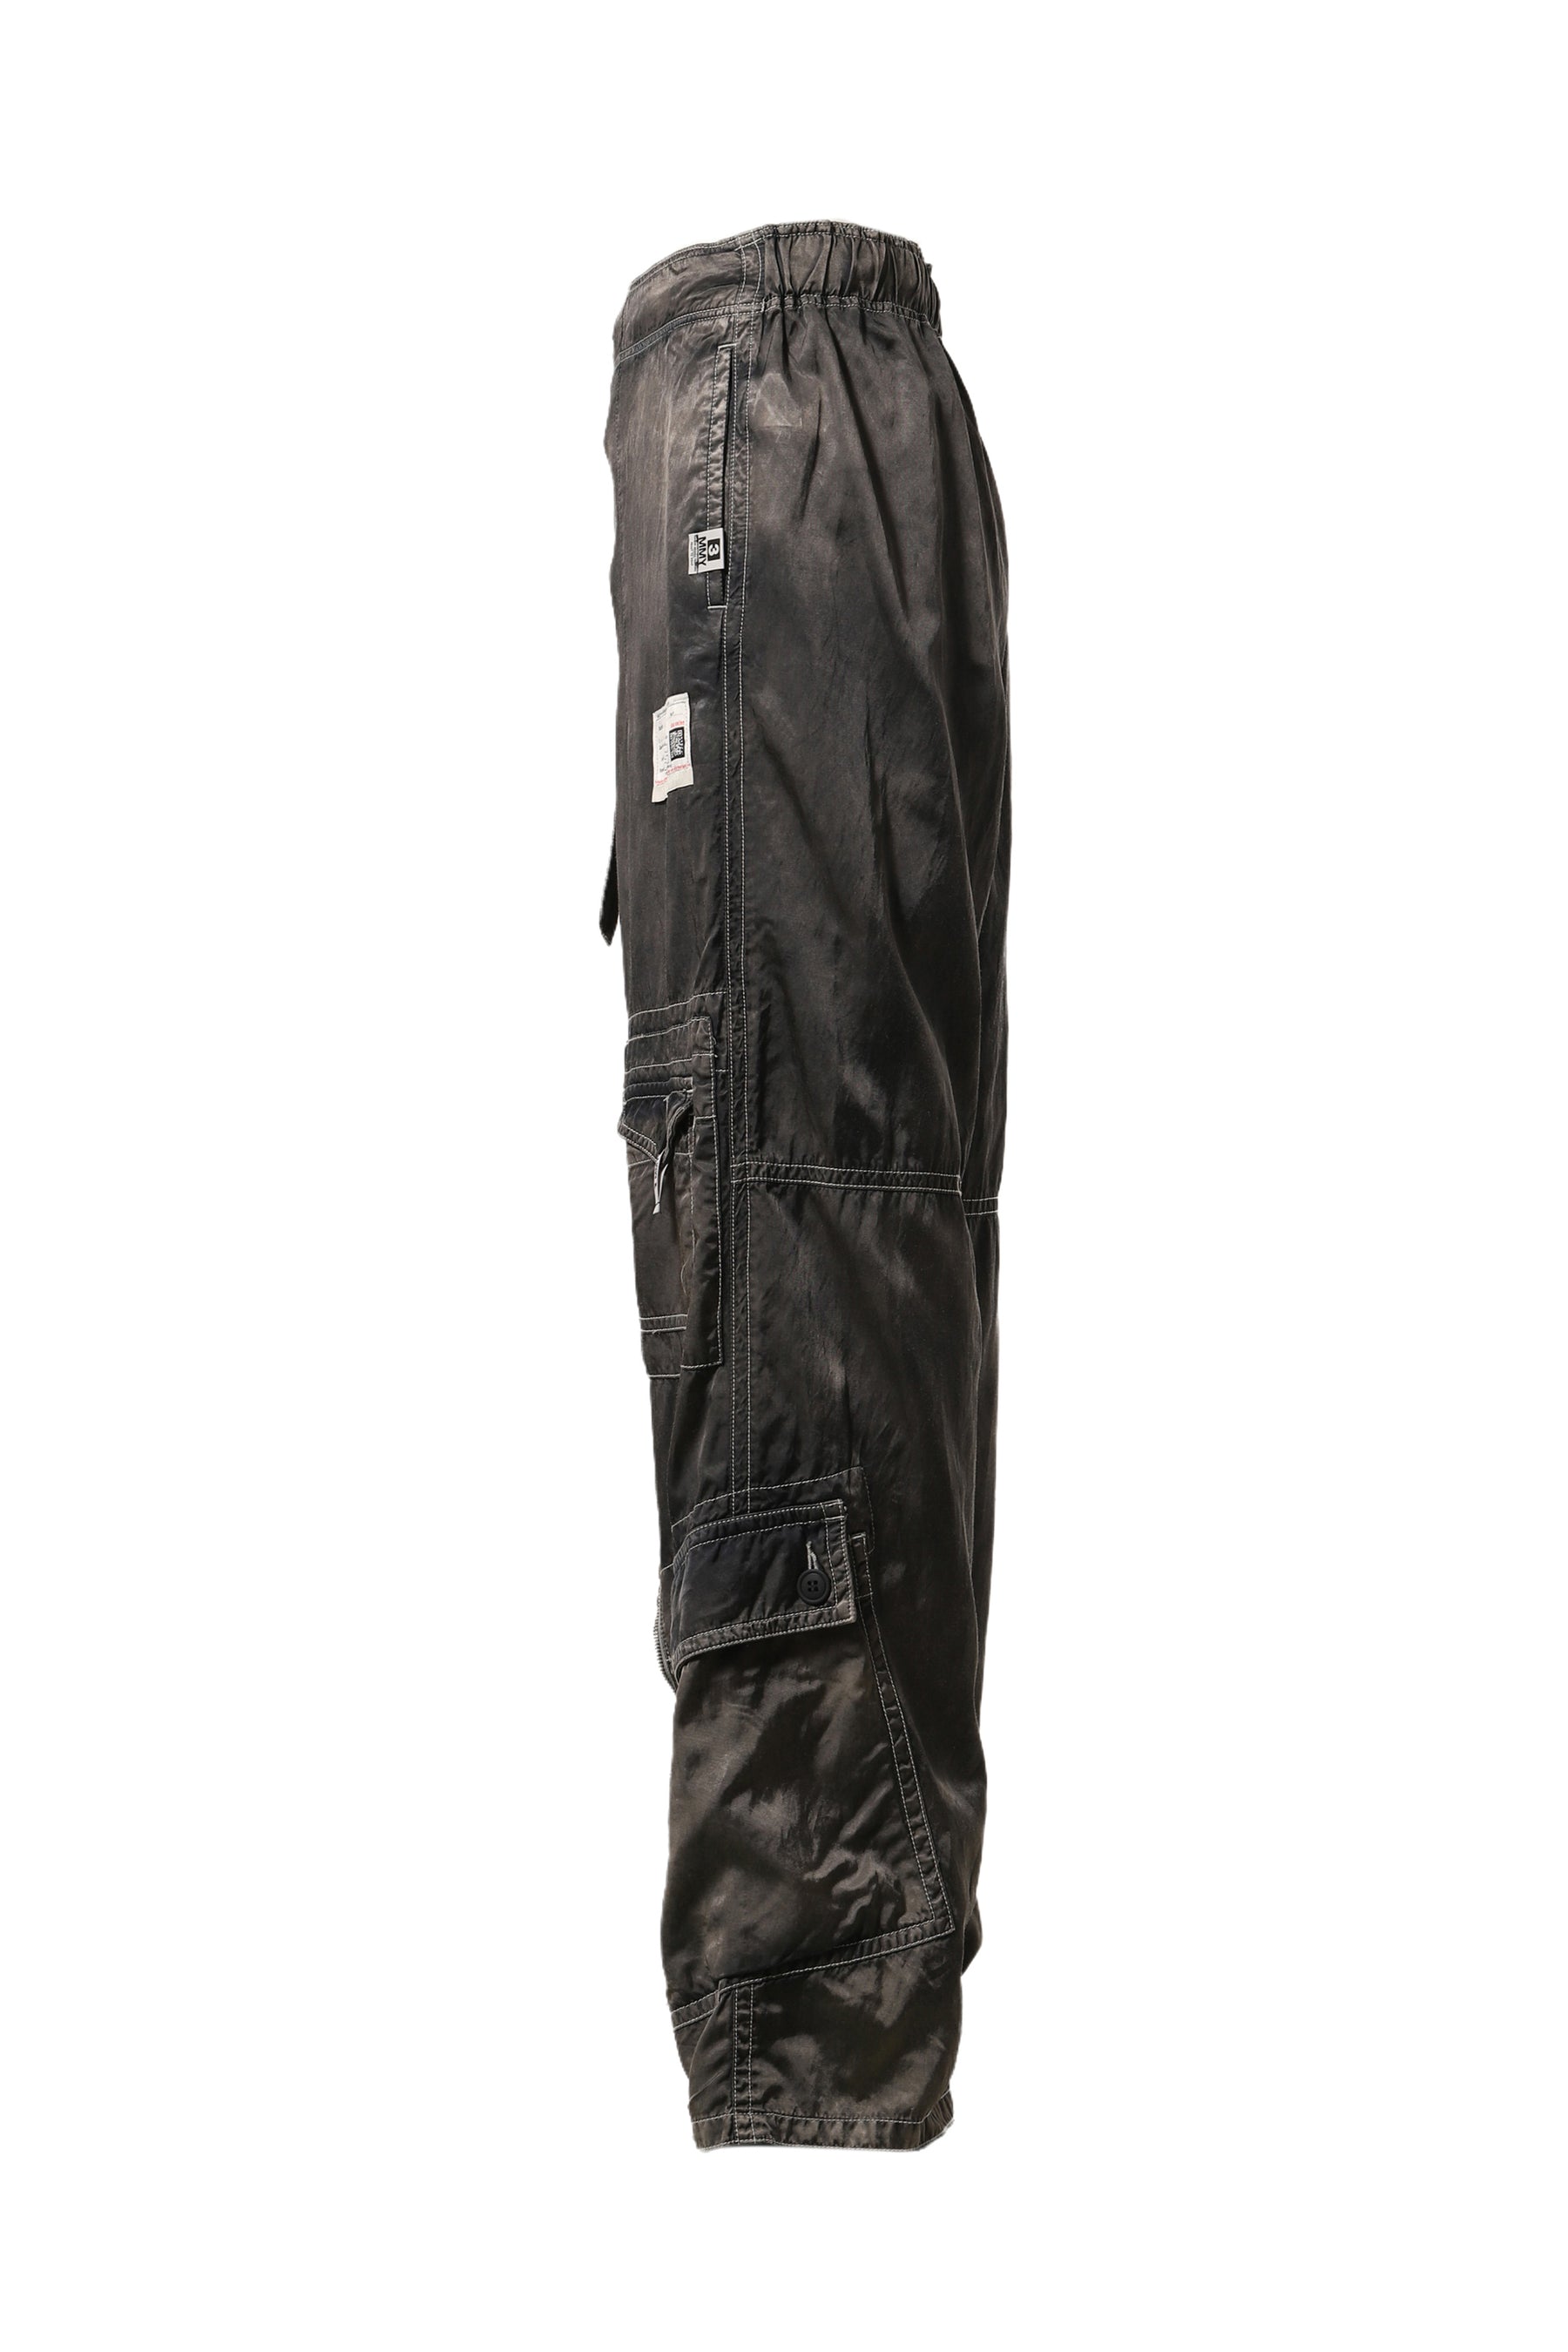 RC TWILL PARACHUTE TROUSERS / BLK